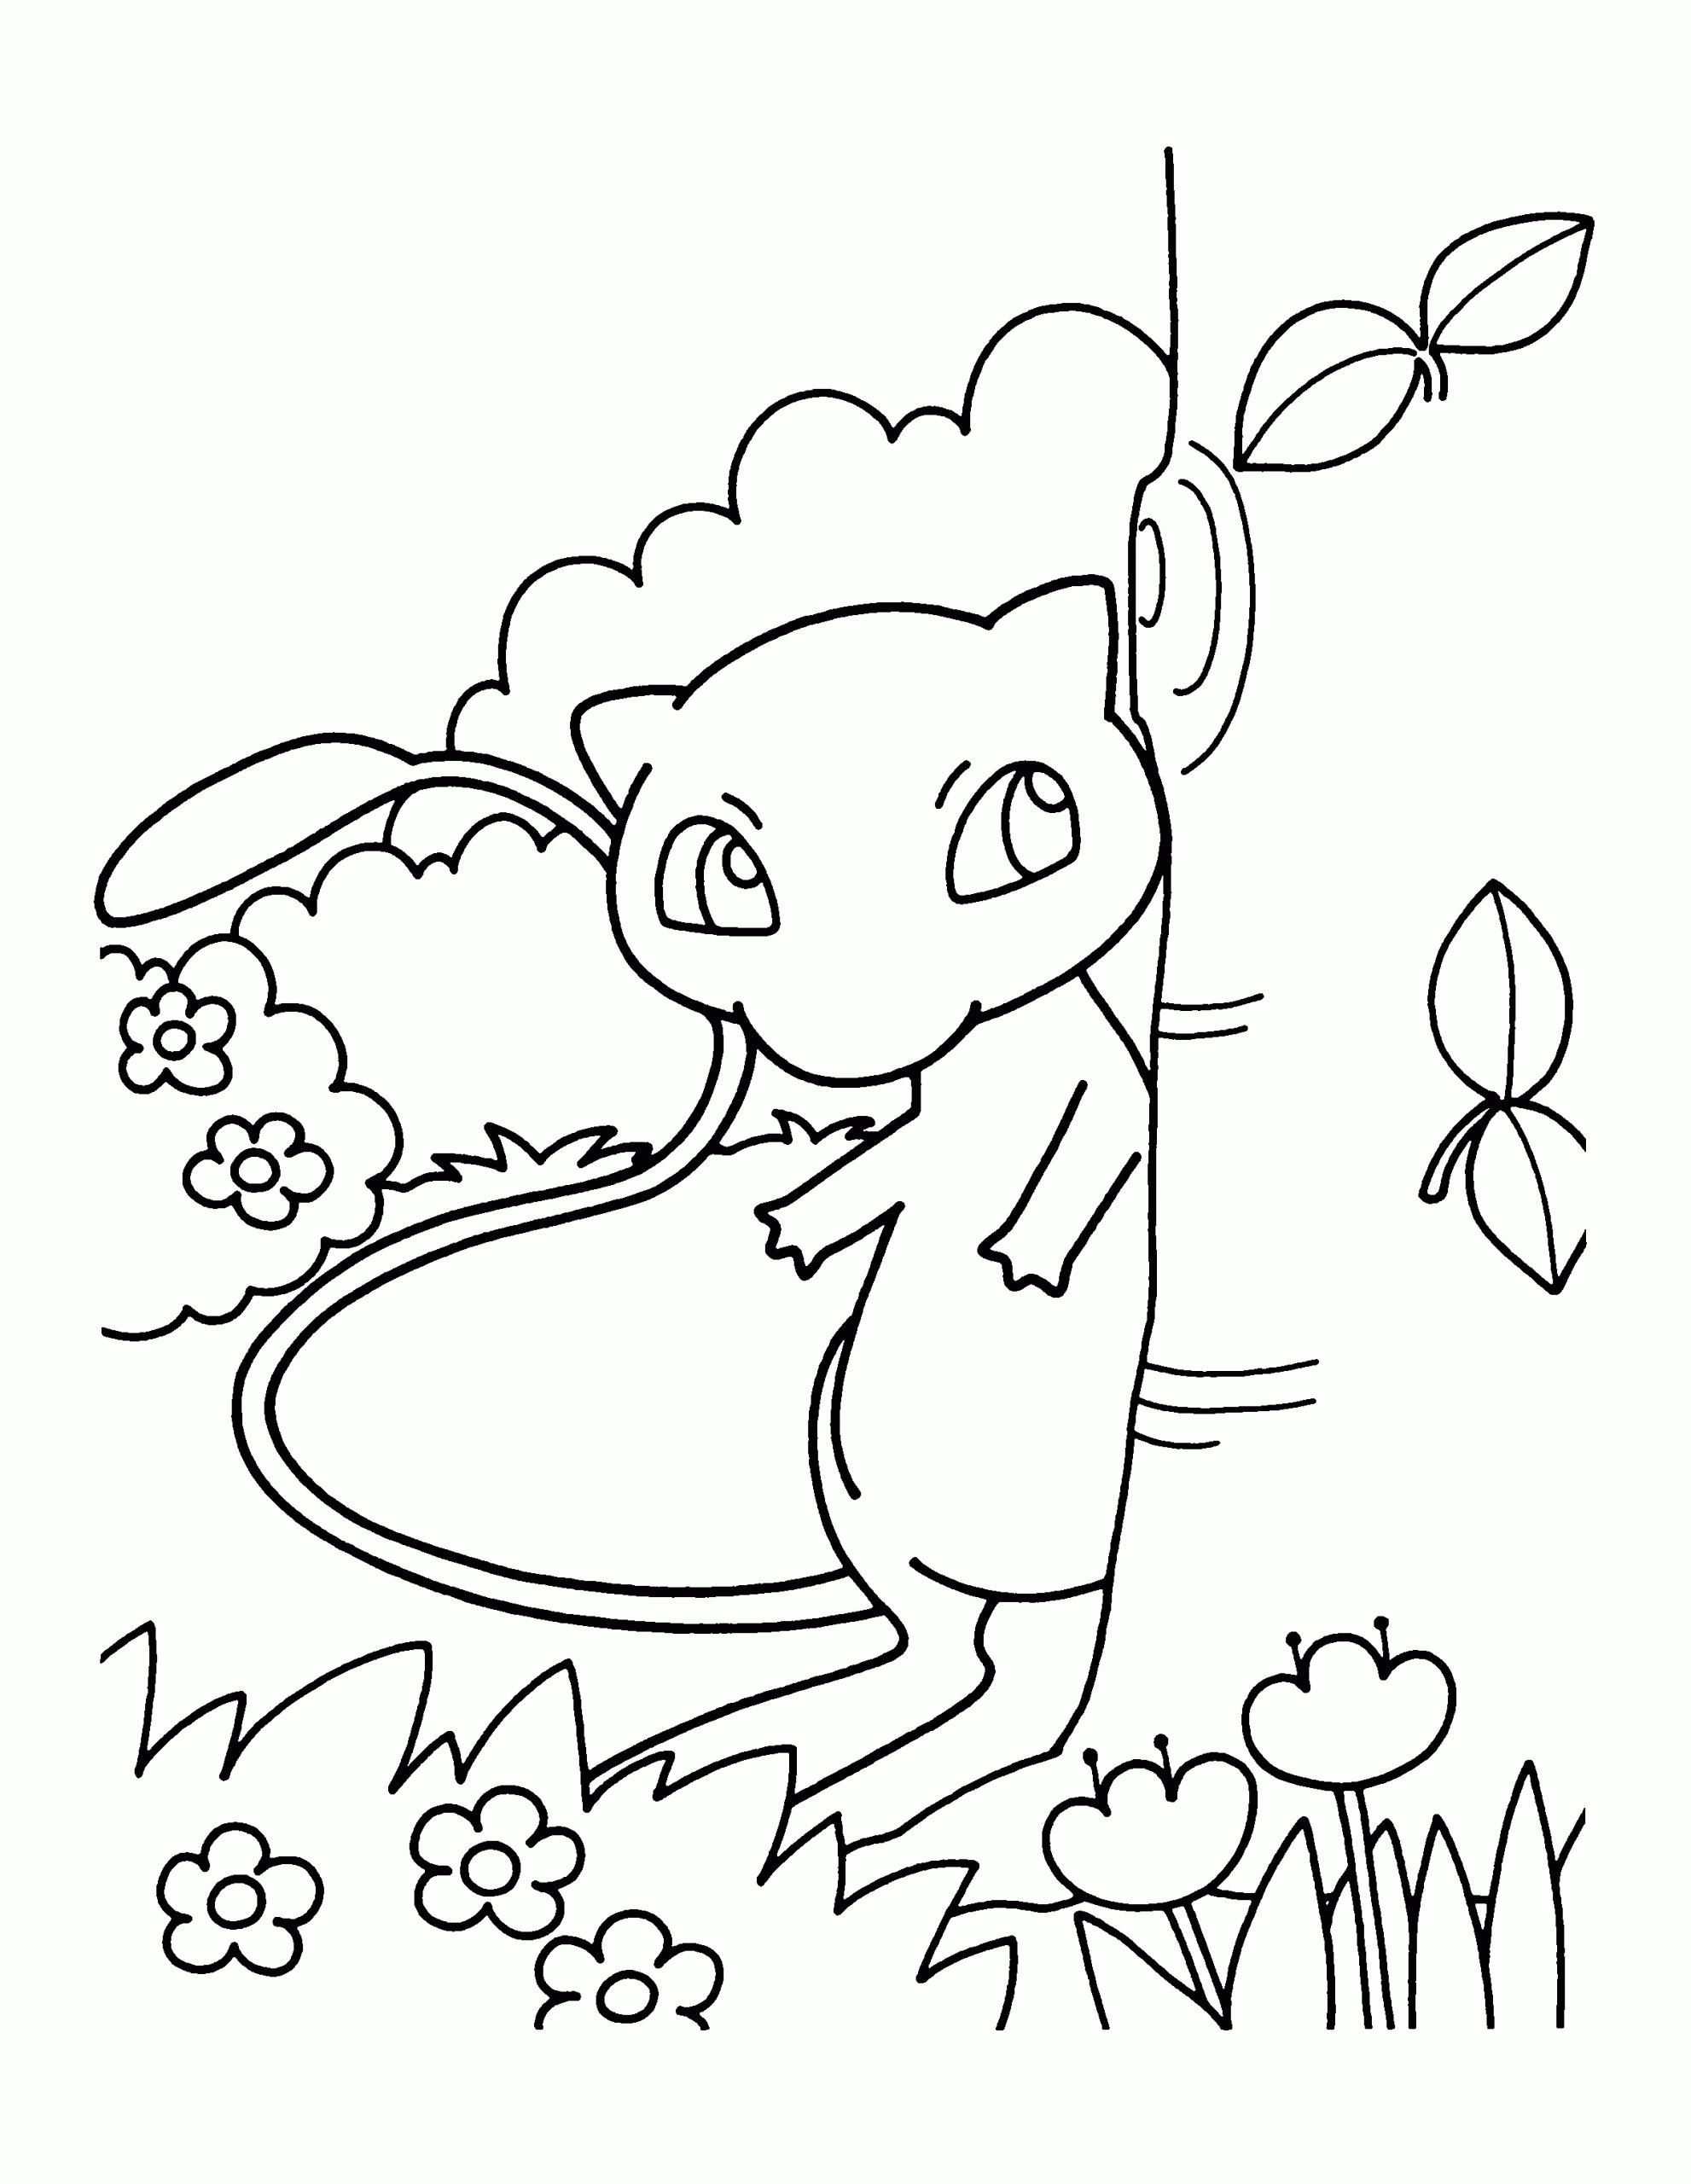 Pokemon Coloring Pages For Boys
 Pokemon Coloring Pages